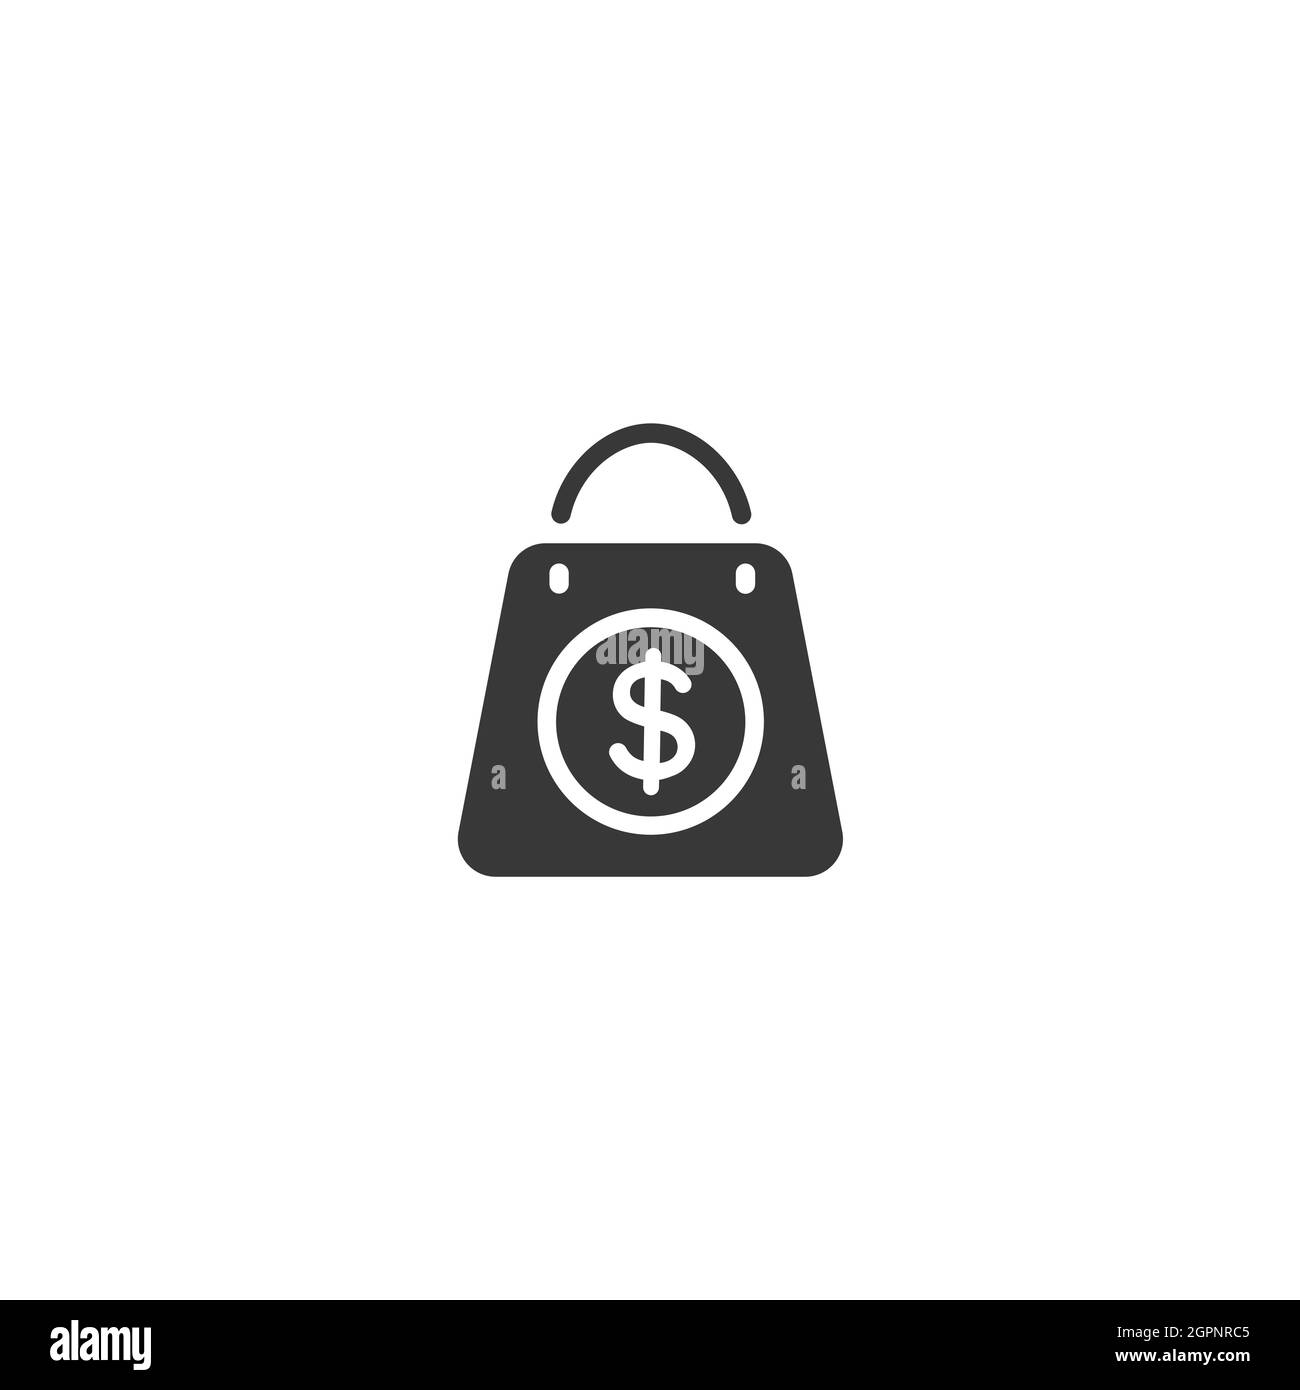 Shopping bag. Dollar sign. Isolated icon. Commerce glyph vector illustration Stock Vector